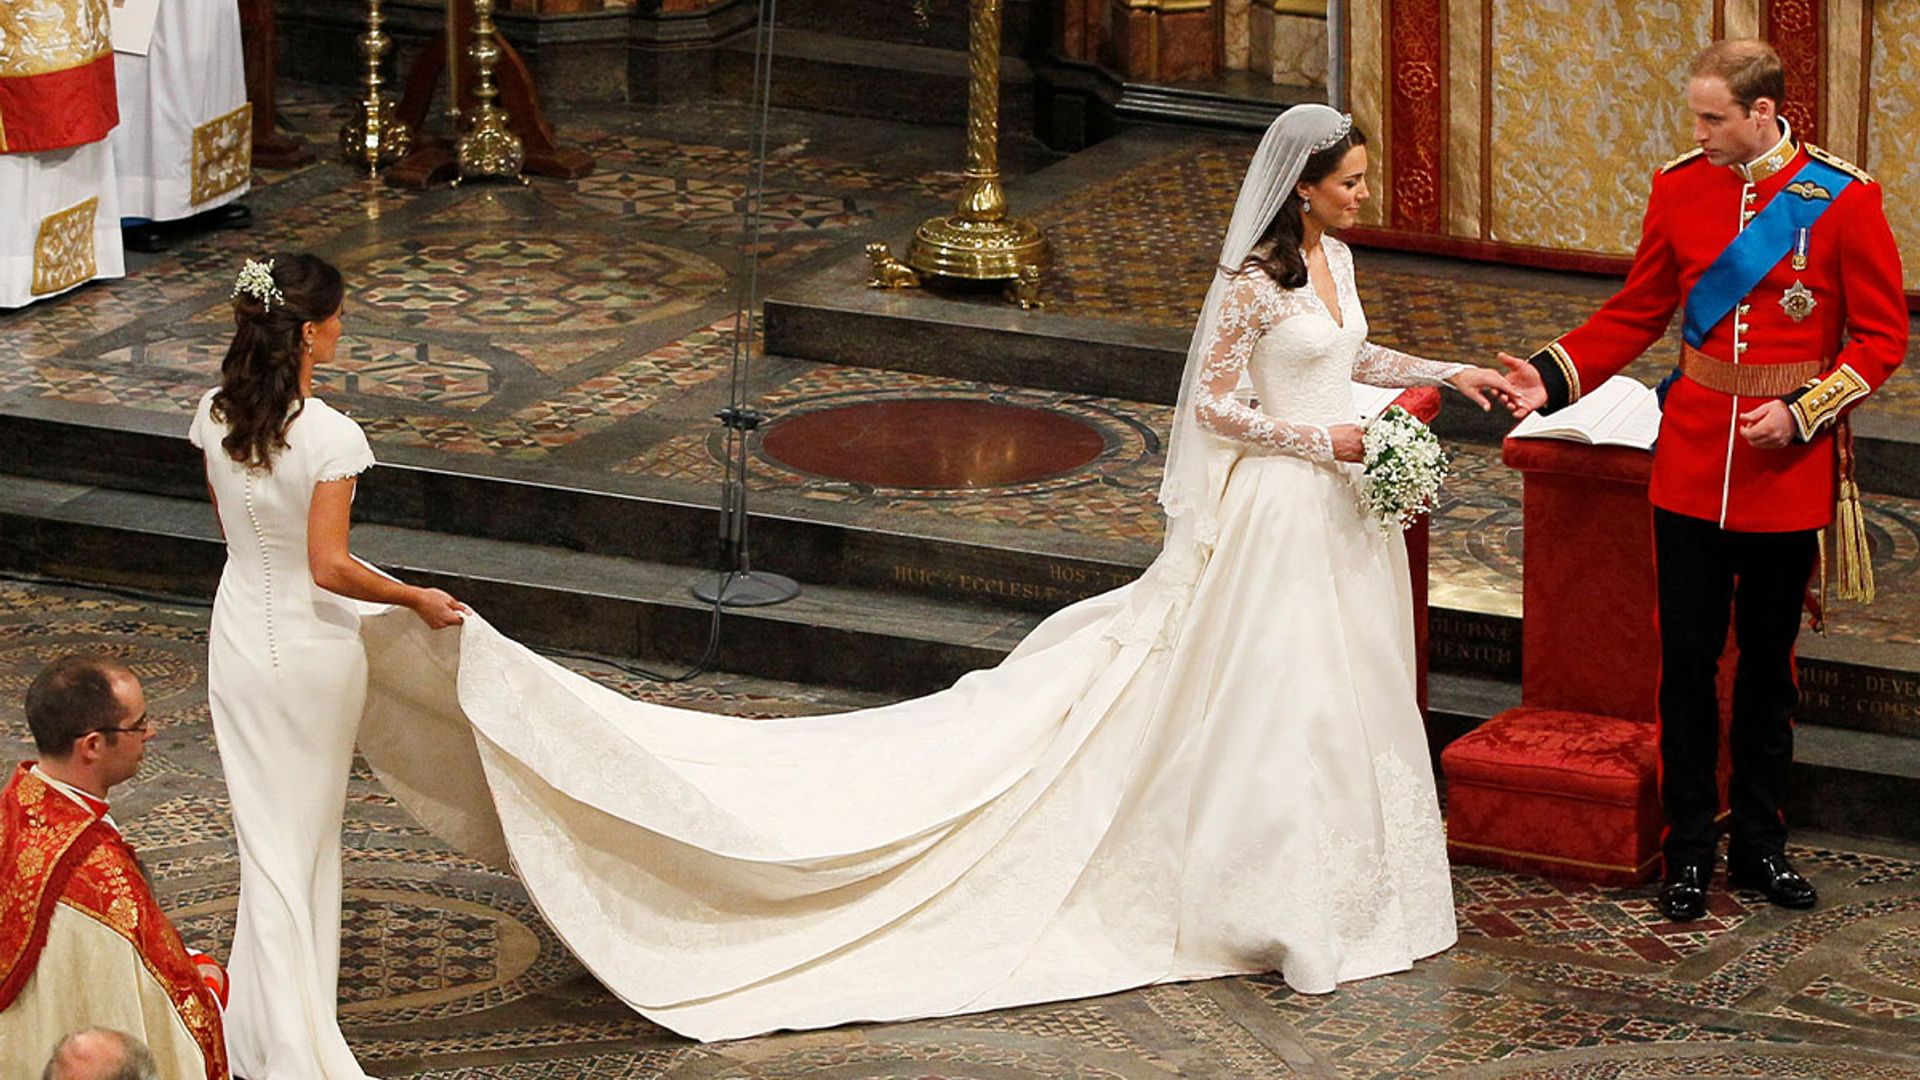 7 royal wedding faux pas you probably missed